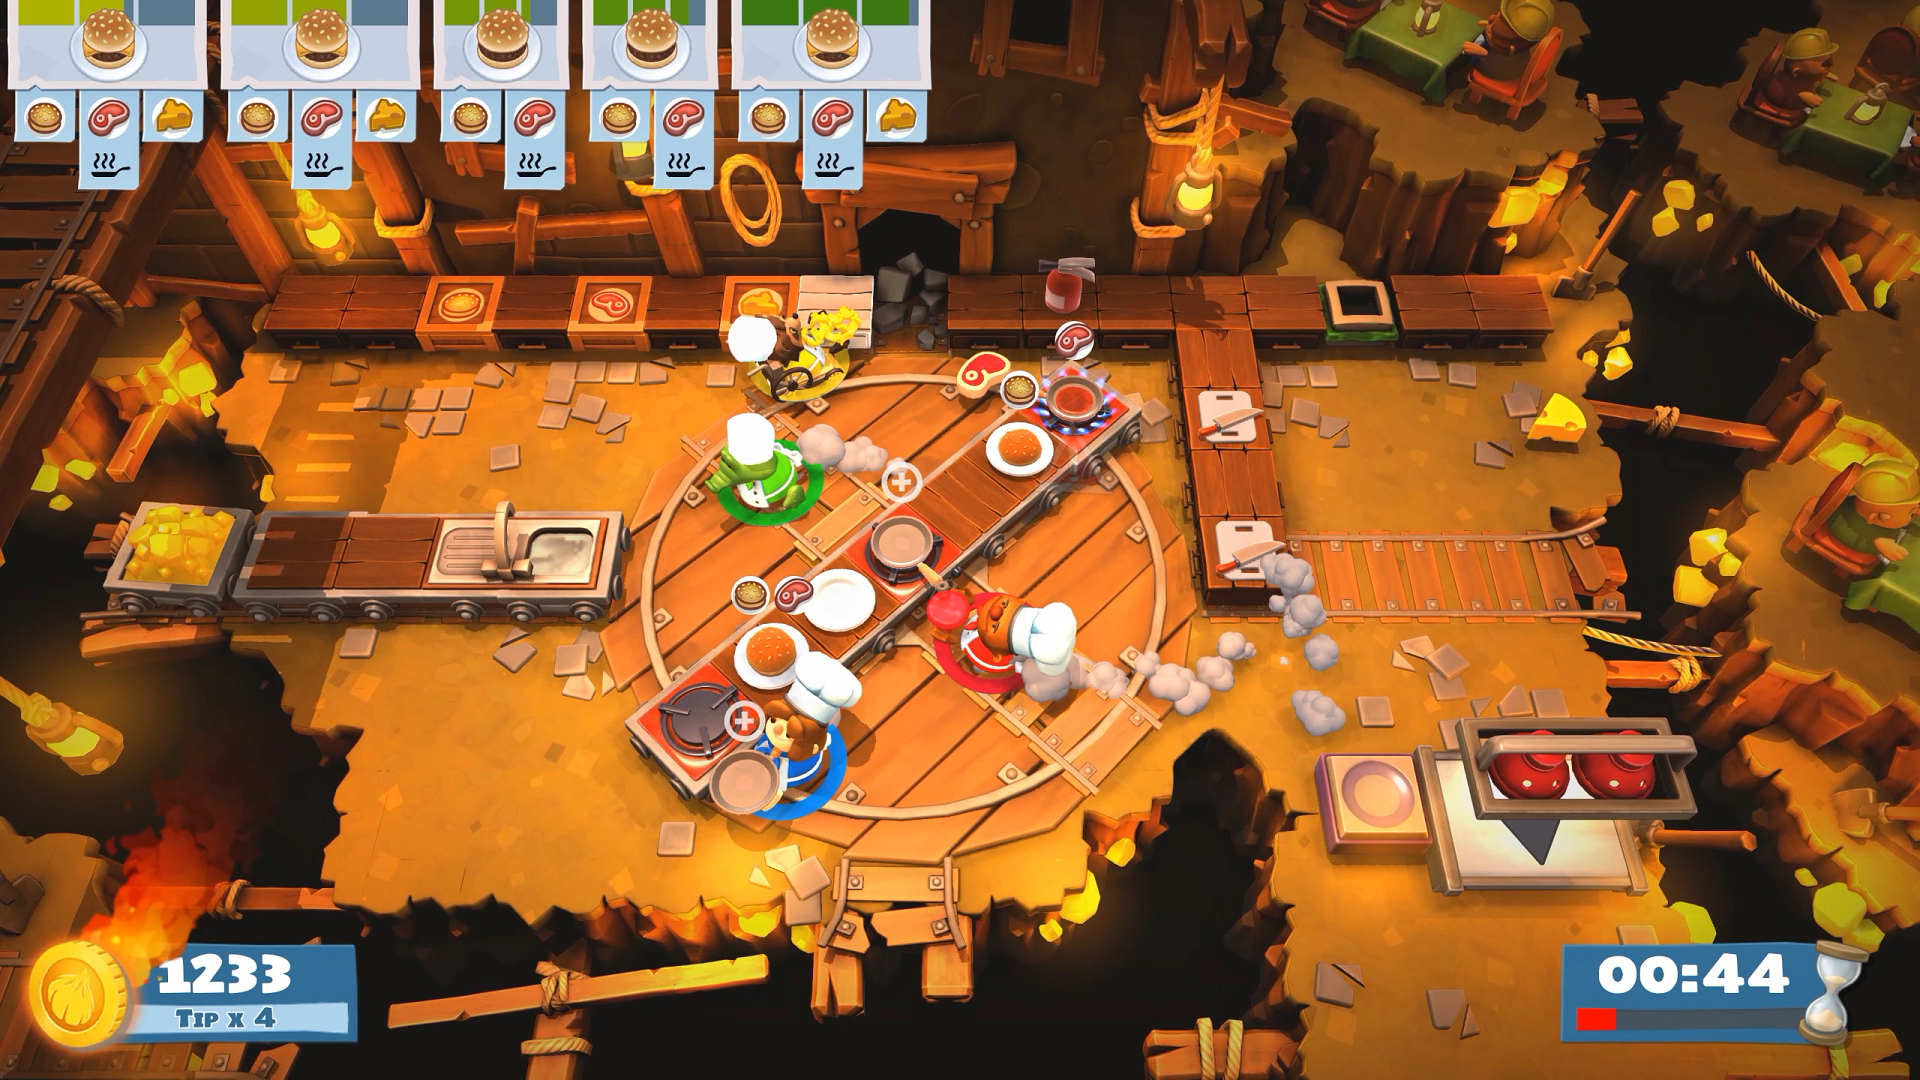 ps store overcooked 2